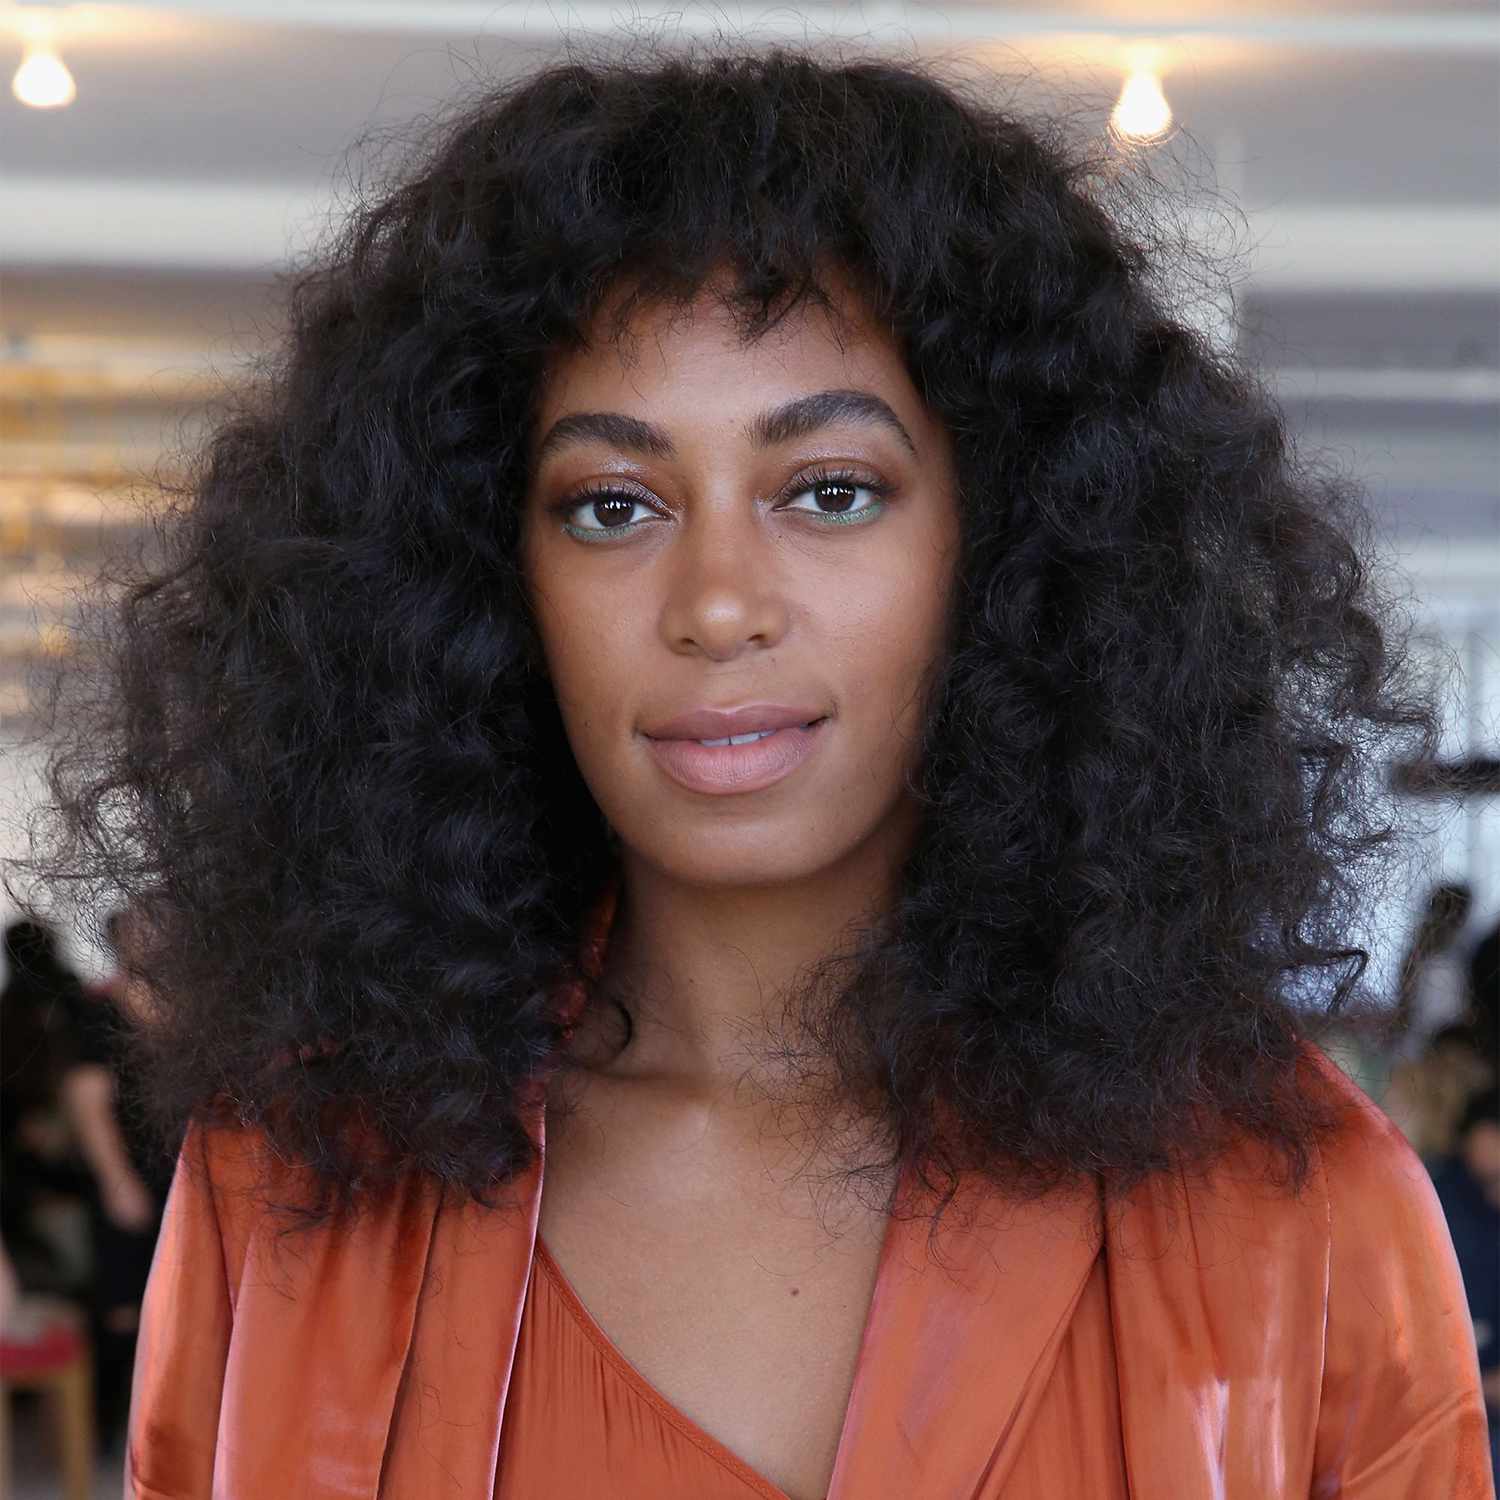 Solange with curly hair and baby bangs